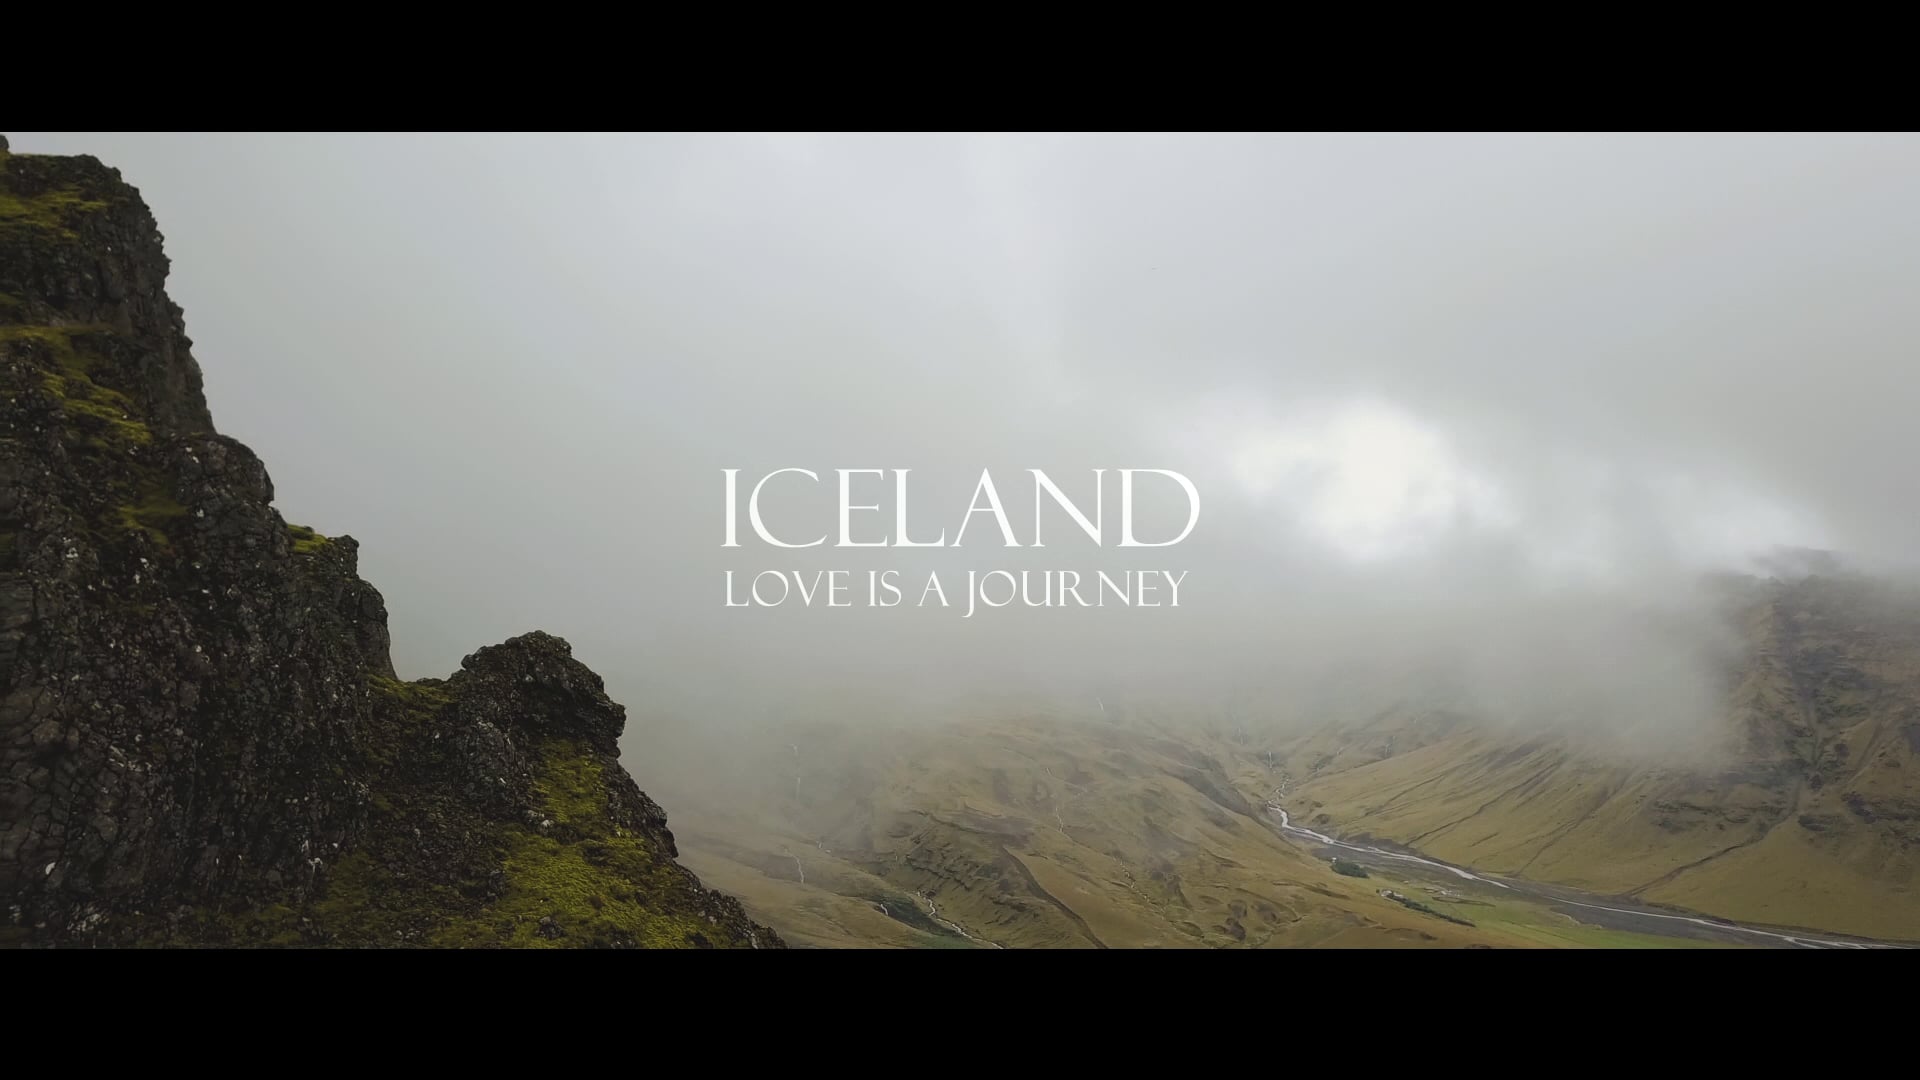 Iceland - Love is a journey